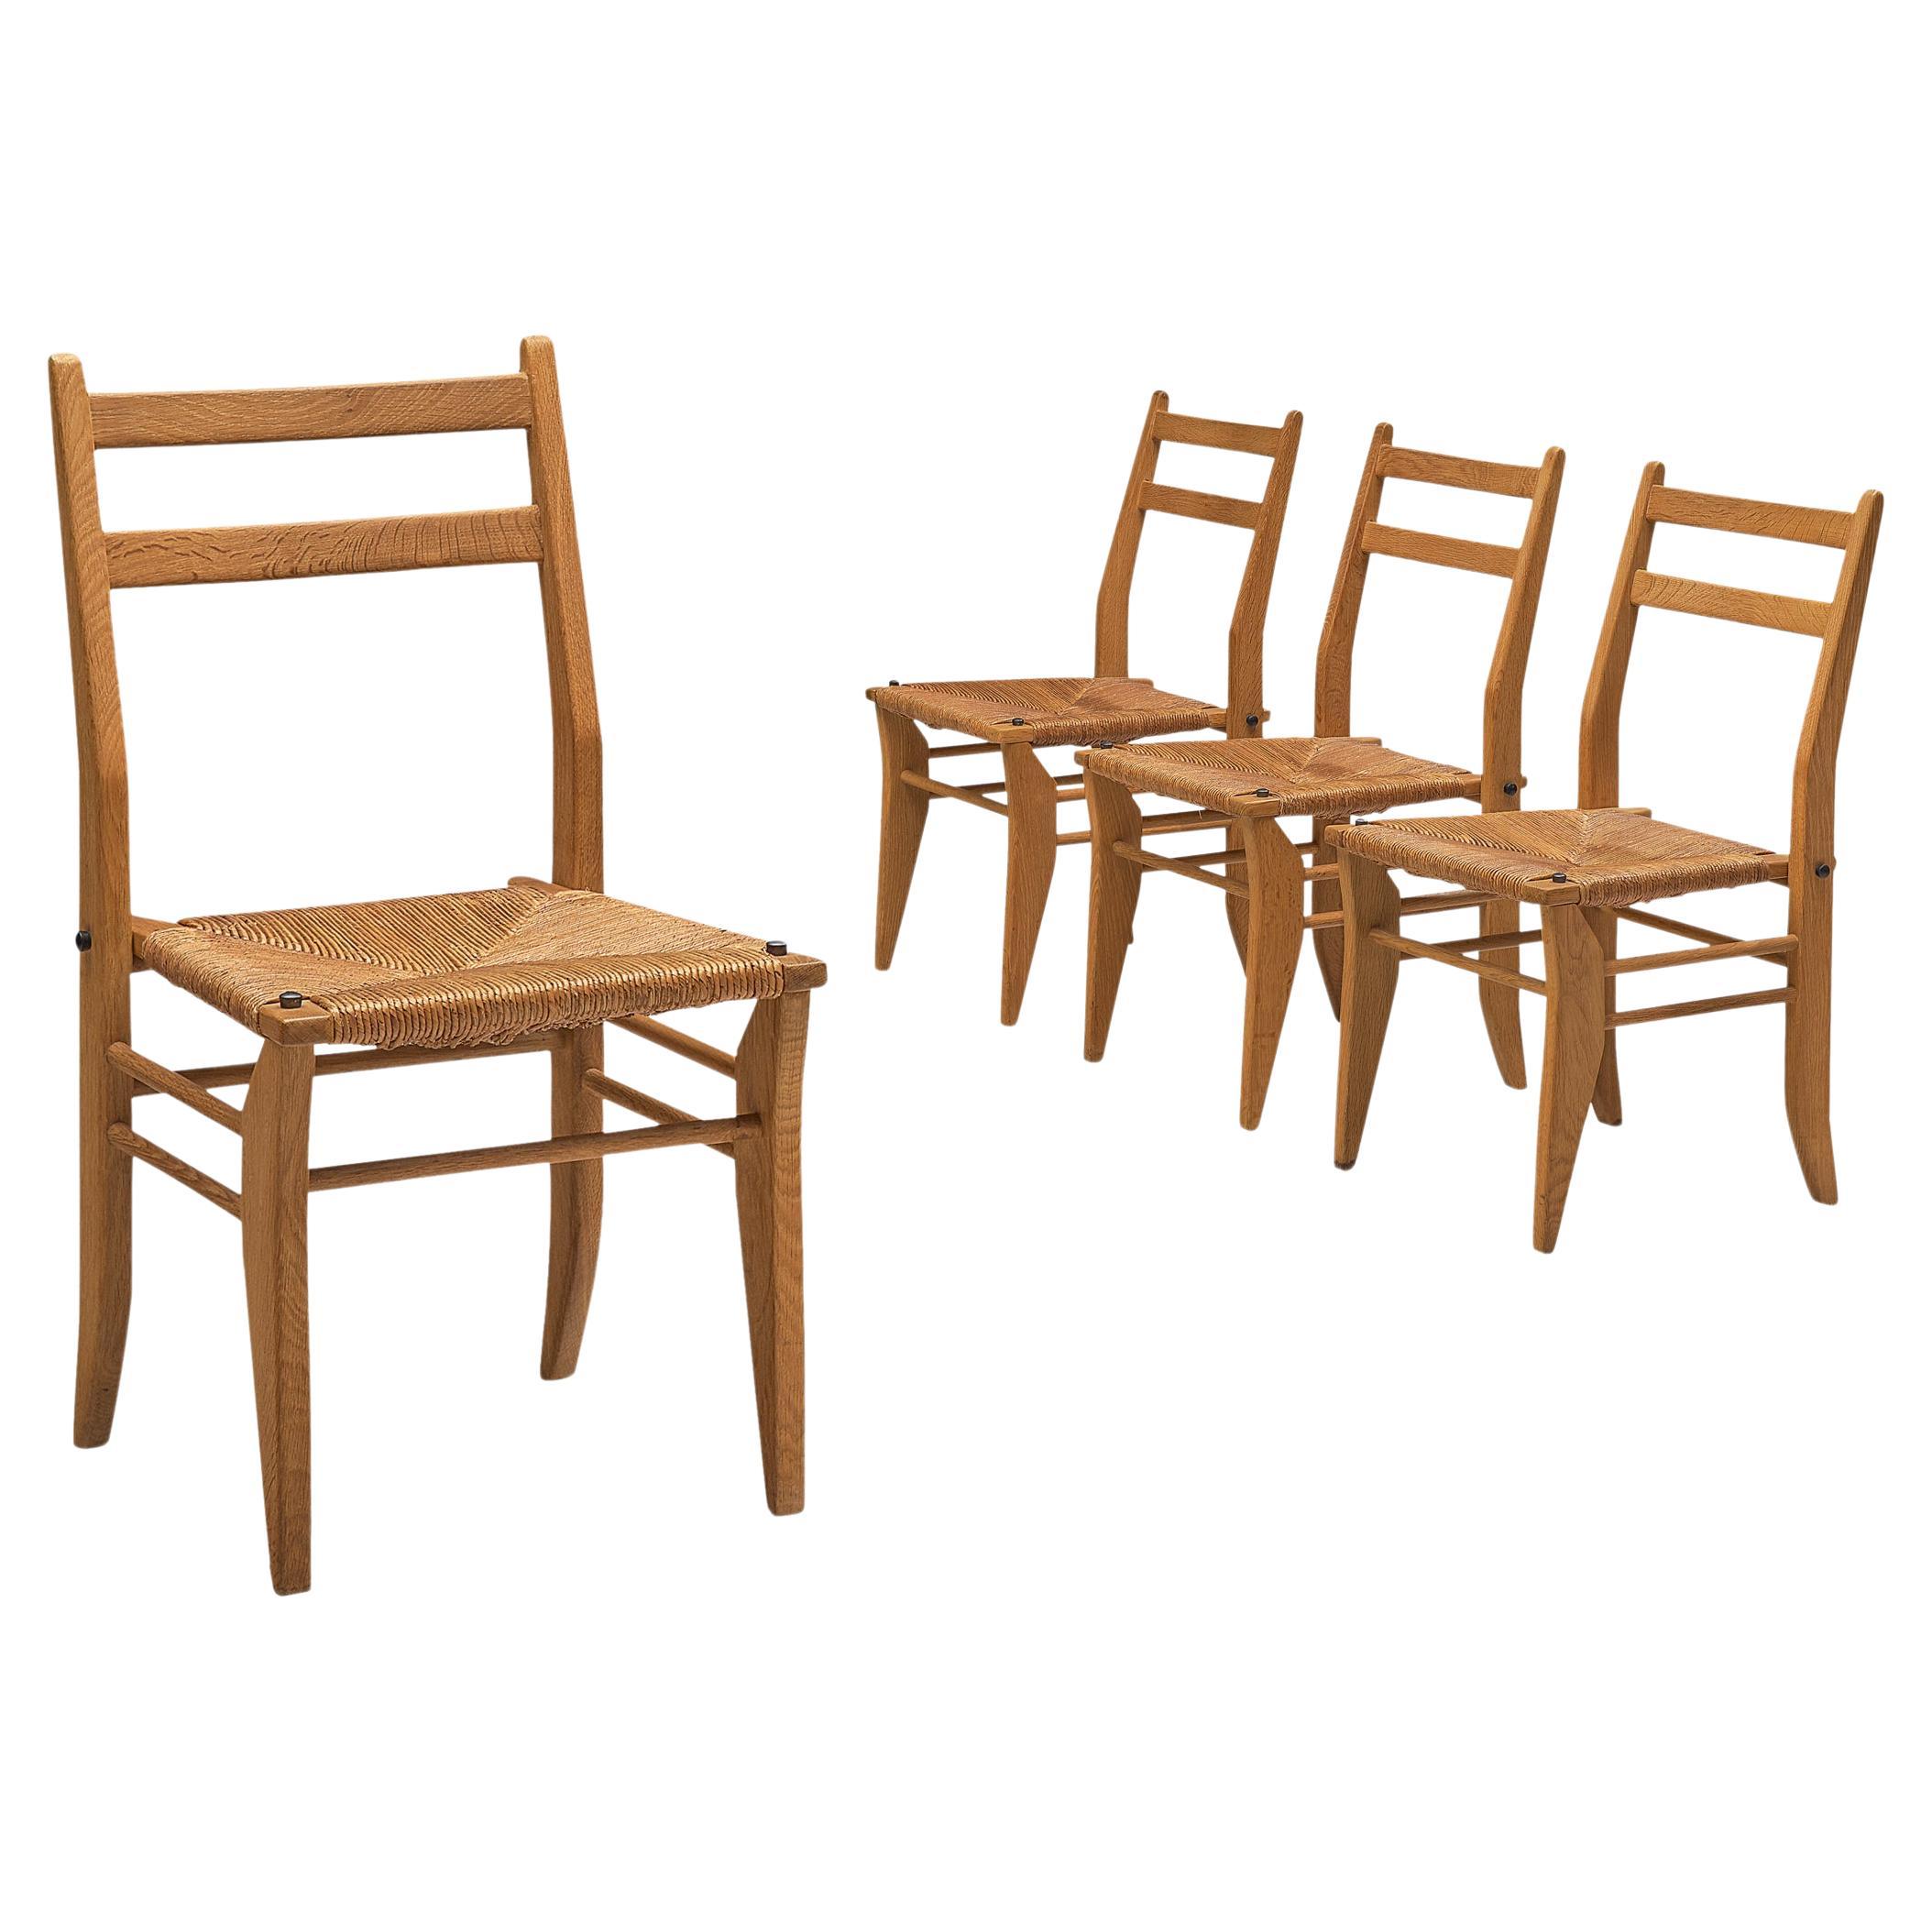 Guillerme & Chambron Set of Four Dining Chairs with Rope Seats 